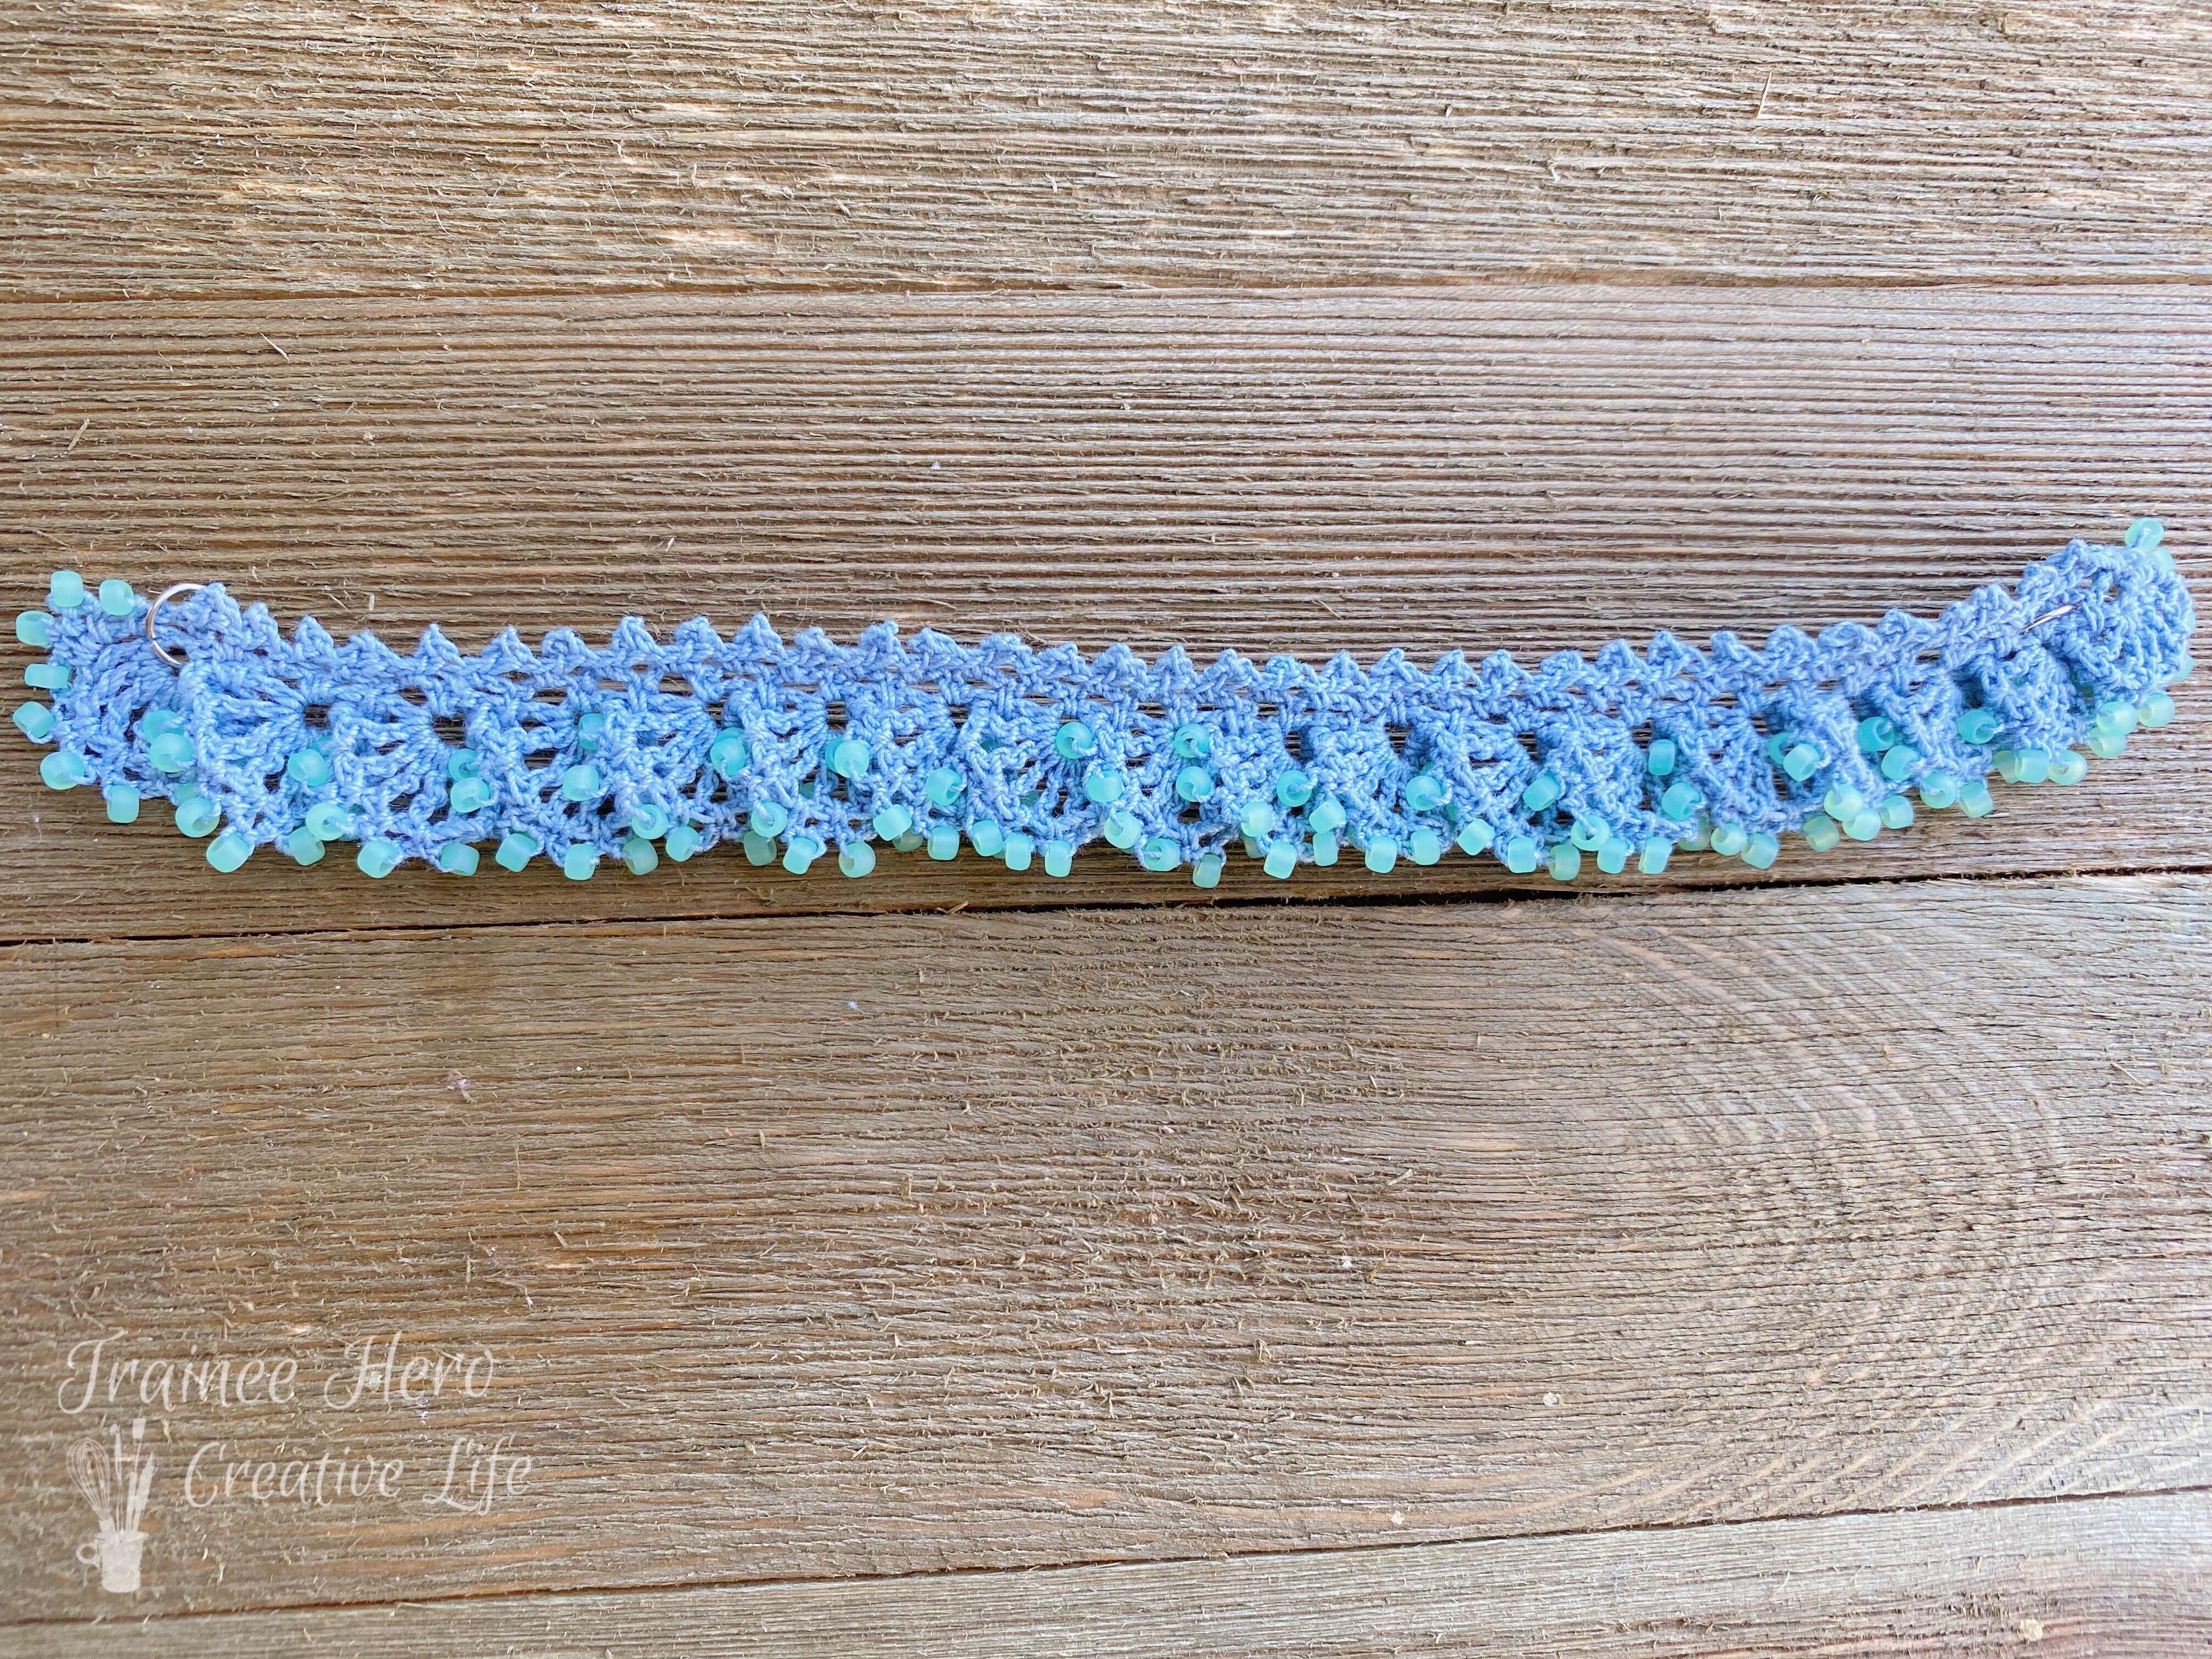 One crochet bracelet with beads laid out flat.